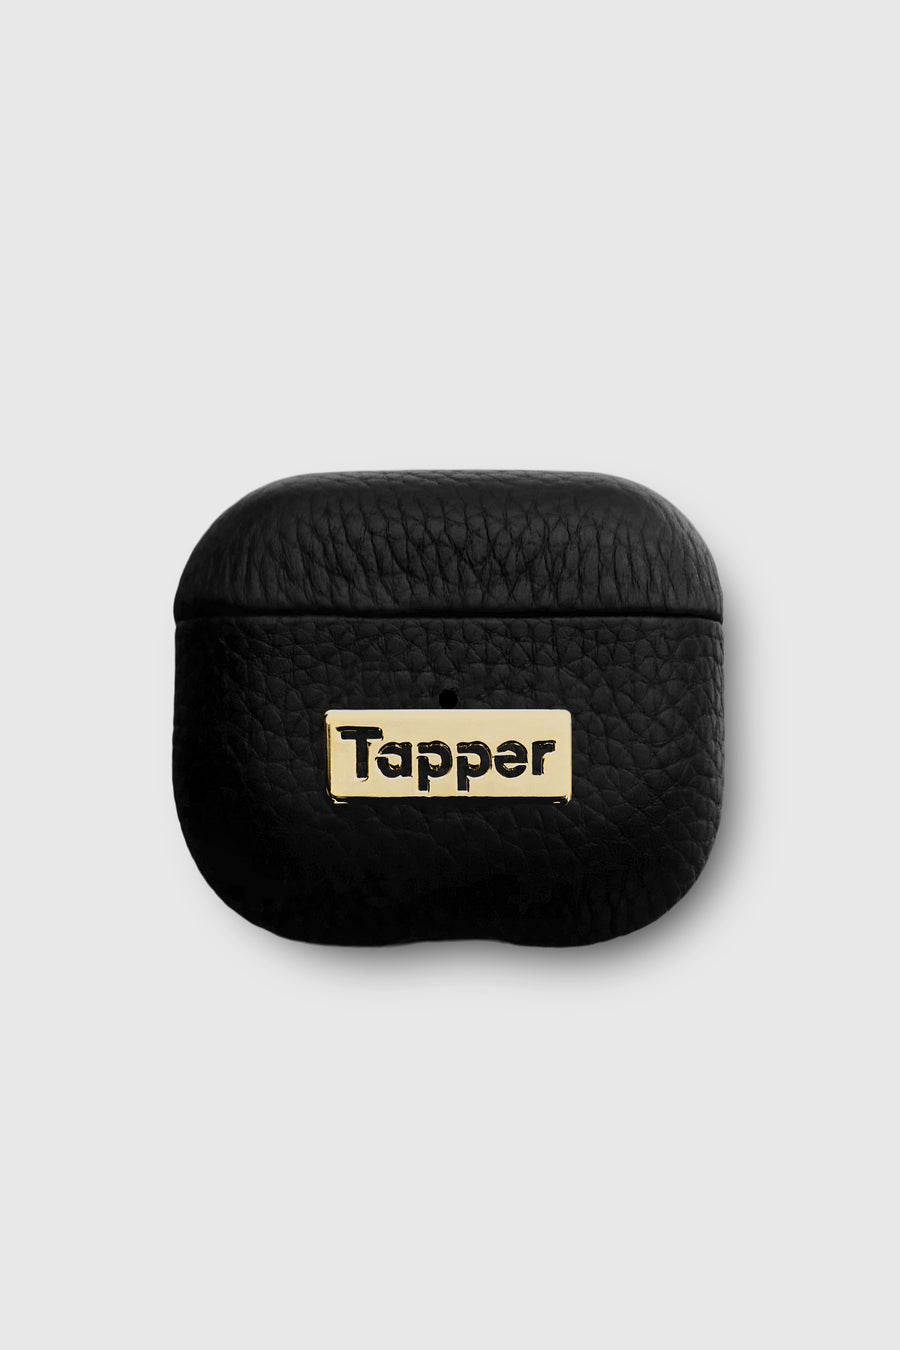 Tapper's luxurious black genuine lamb leather AirPods case protects and elevates the look of your AirPods. The luxurious, protective case for AirPods with a metal logo plate in real 18k gold plating steps up your AirPods game. The next must-have high end protective Apple AirPods accessory in real leather and precious metals. Compatible with AirPods (3rd generation). Designed in Sweden by Tapper. Free Express Shipping at gettapper.com